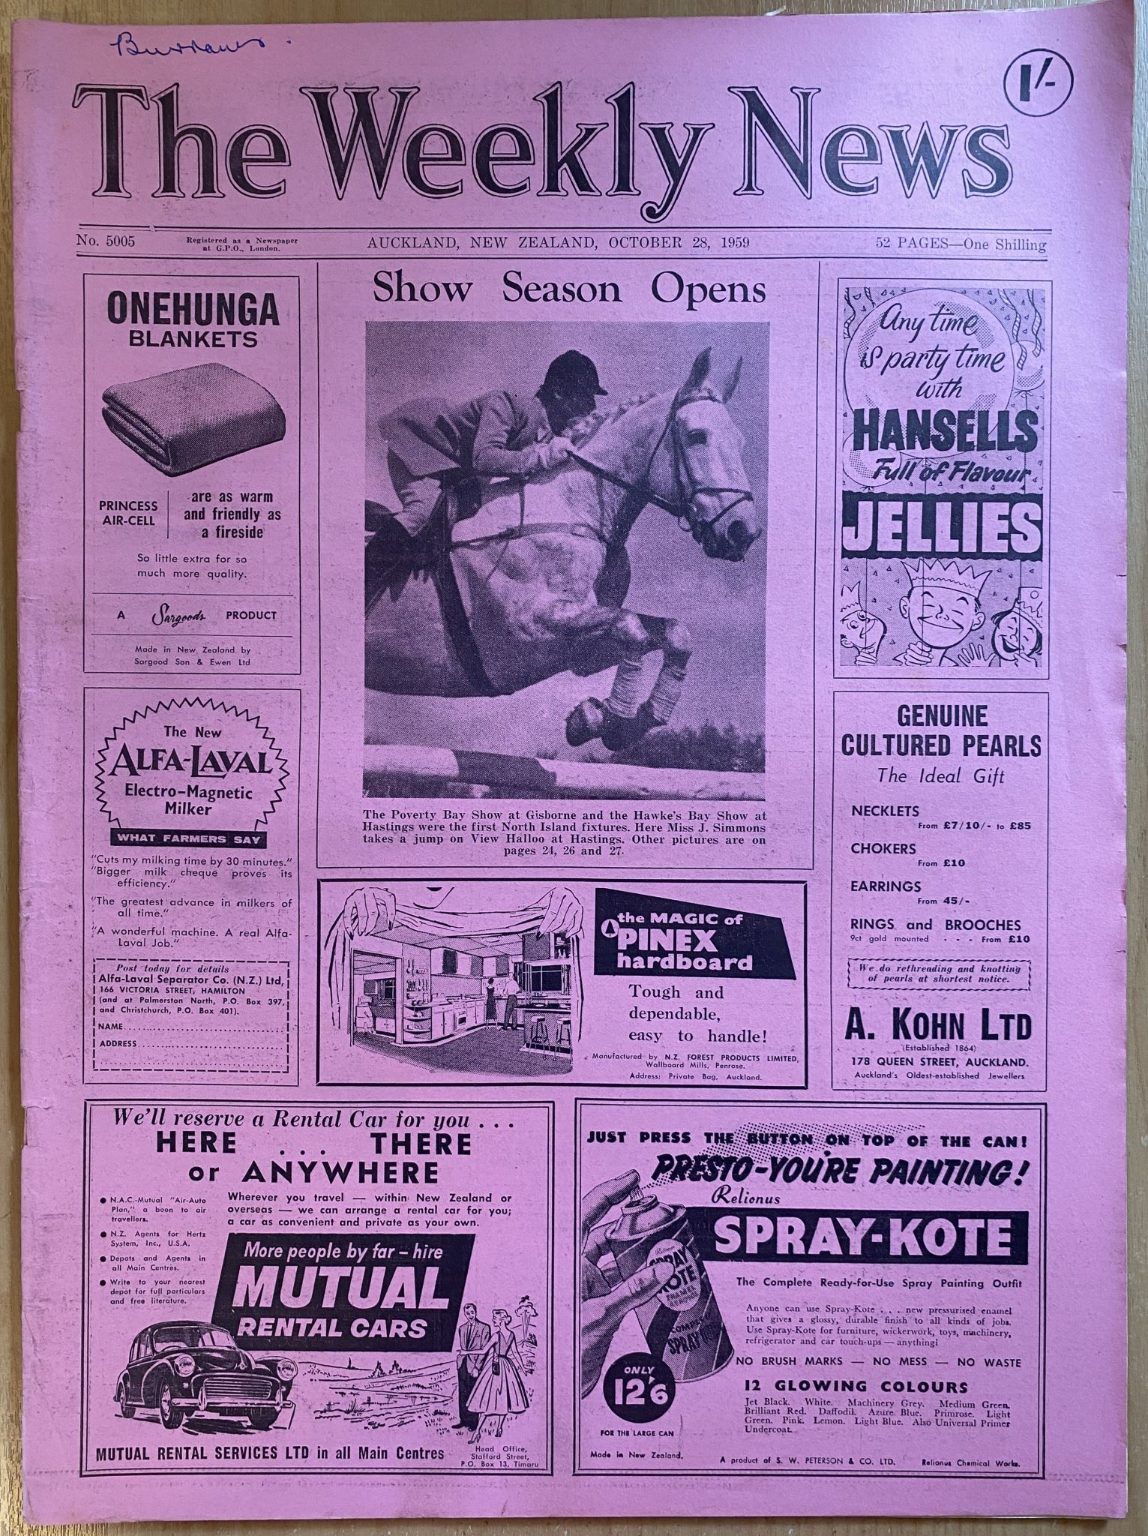 OLD NEWSPAPER: The Weekly News - No. 5005, 28 October 1959